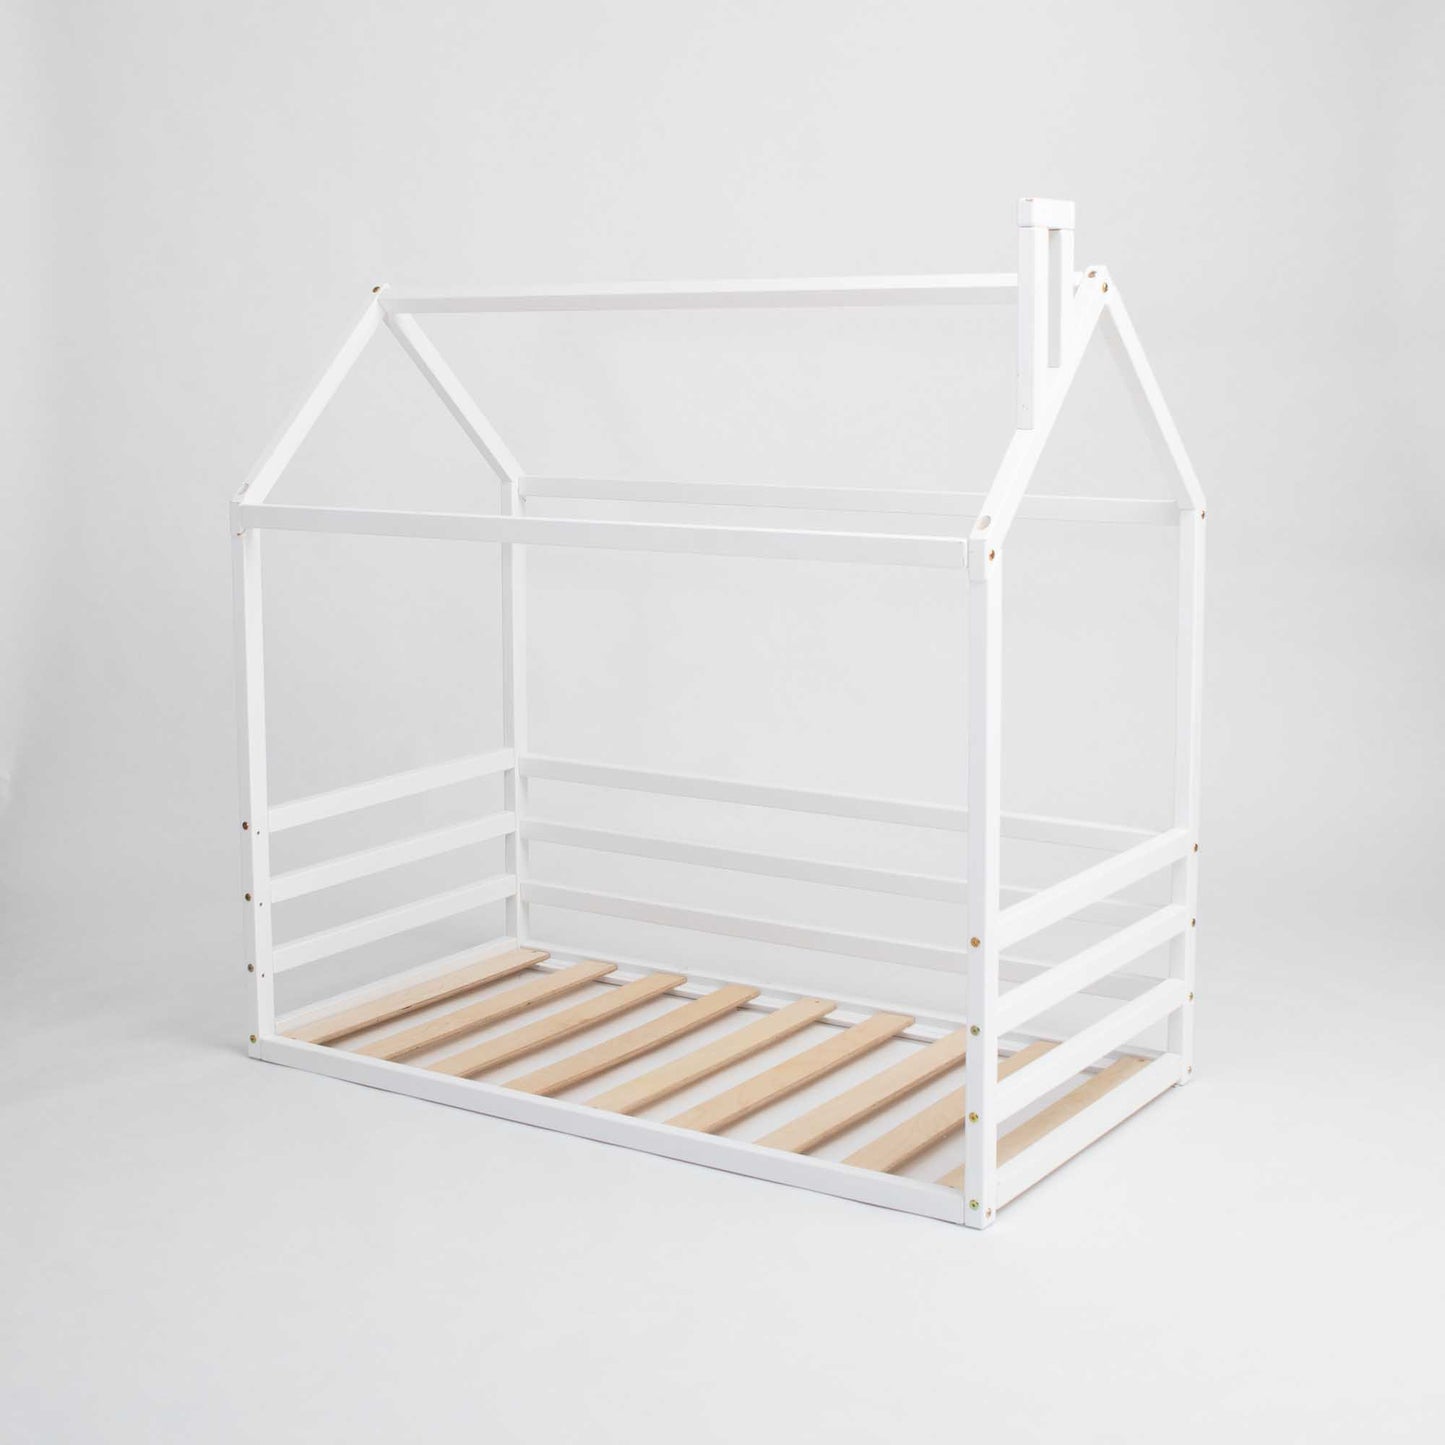 A white Kids' house-frame bed with 3-sided horizontal rails and wooden slats.